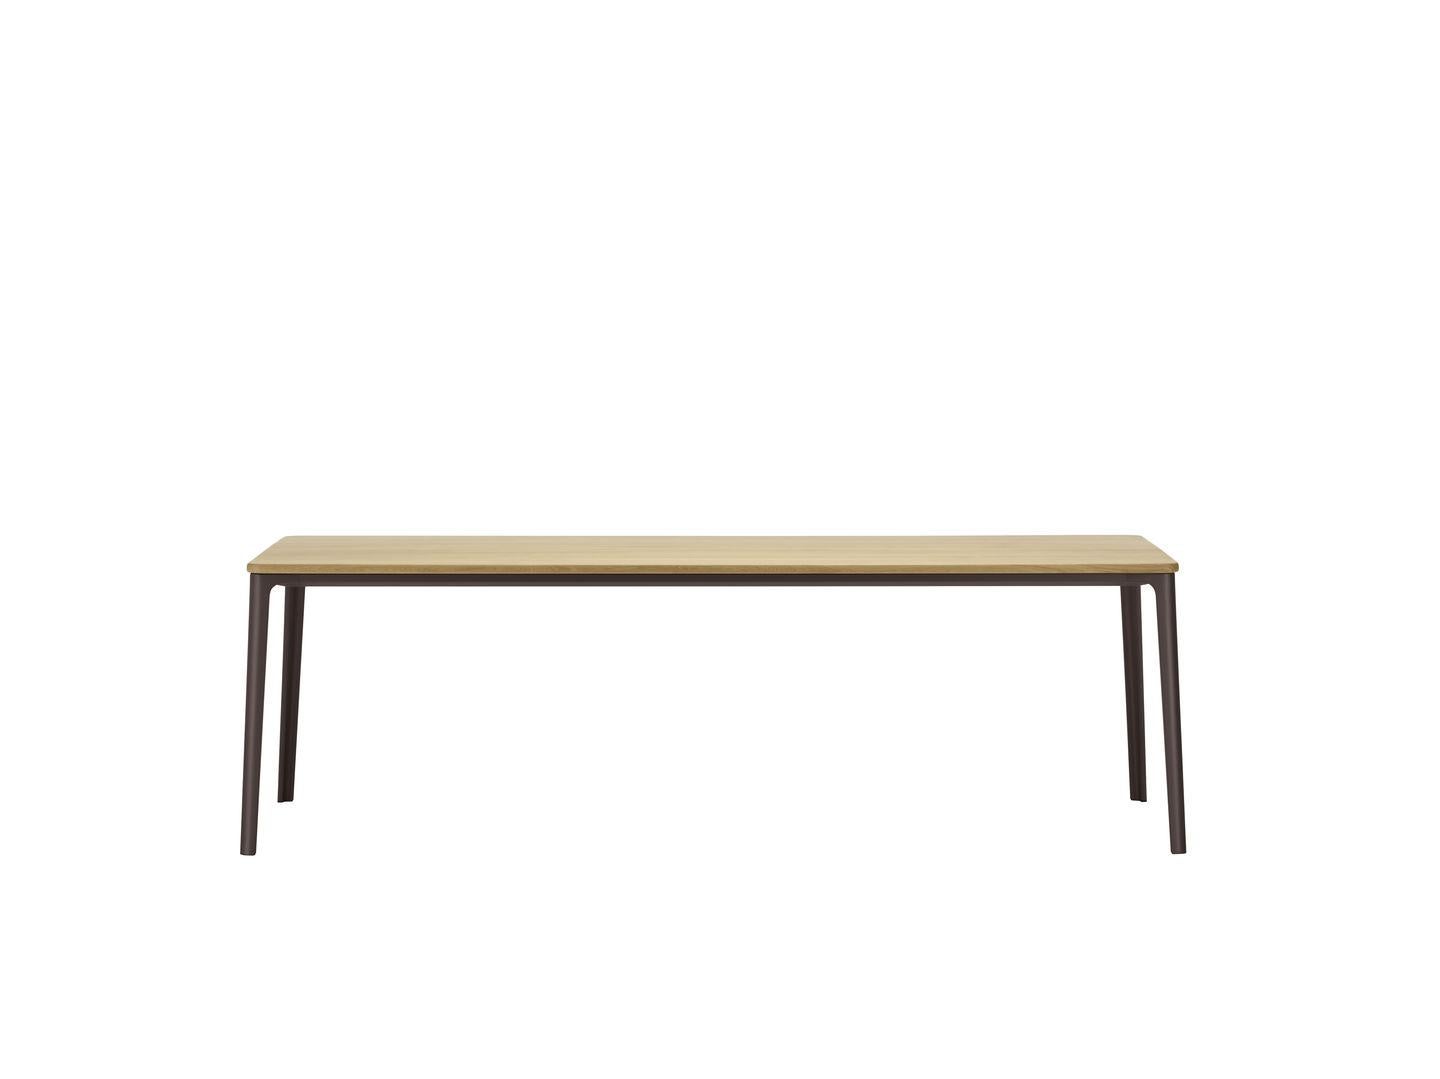 Swiss Jasper Morrison Plate Dining Table, Wood Table Top by Vitra